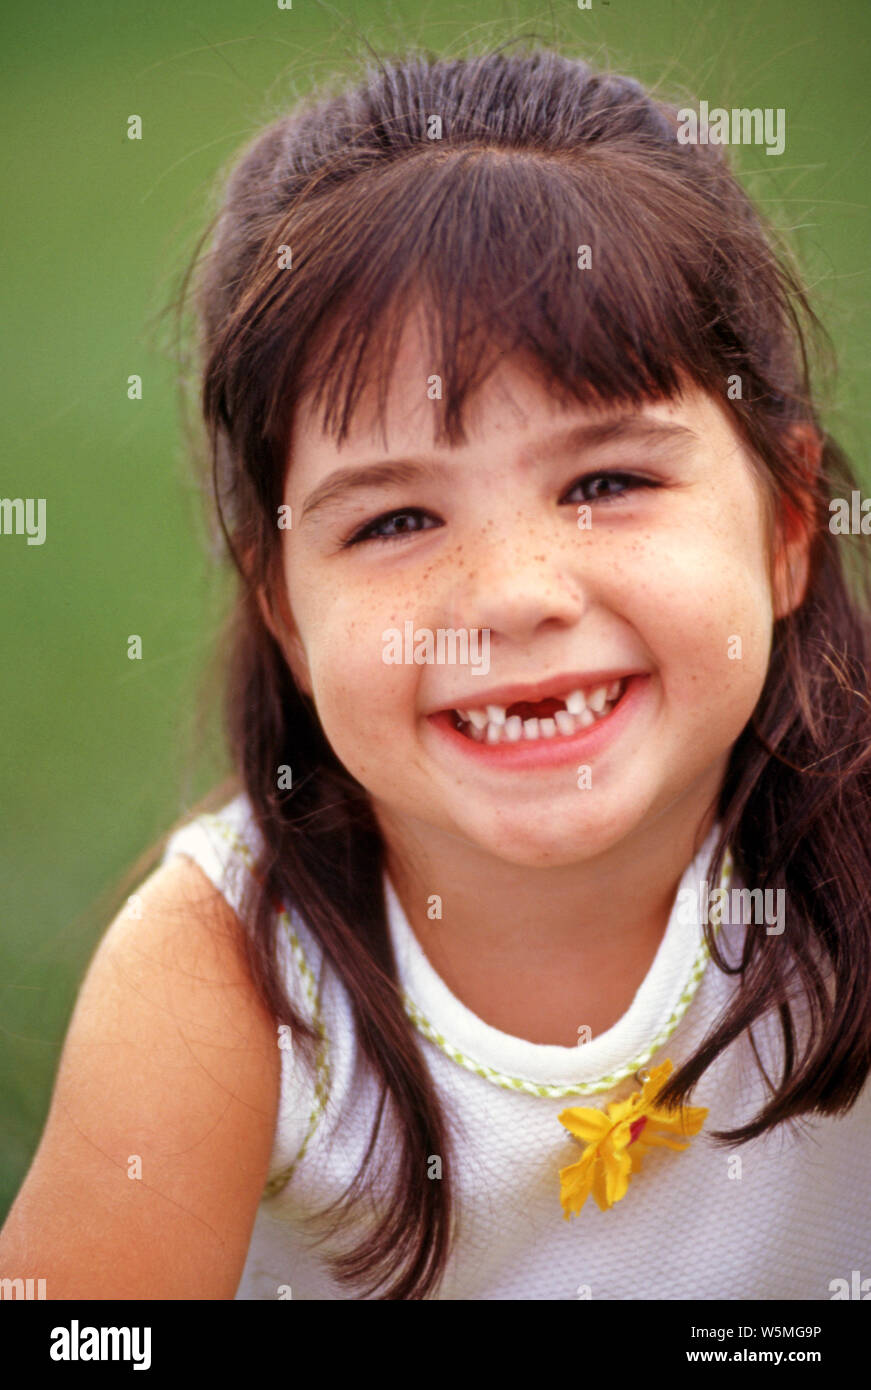 Young girl smiling a camera with a cheesy smile and I space between her teeth Stock Photo